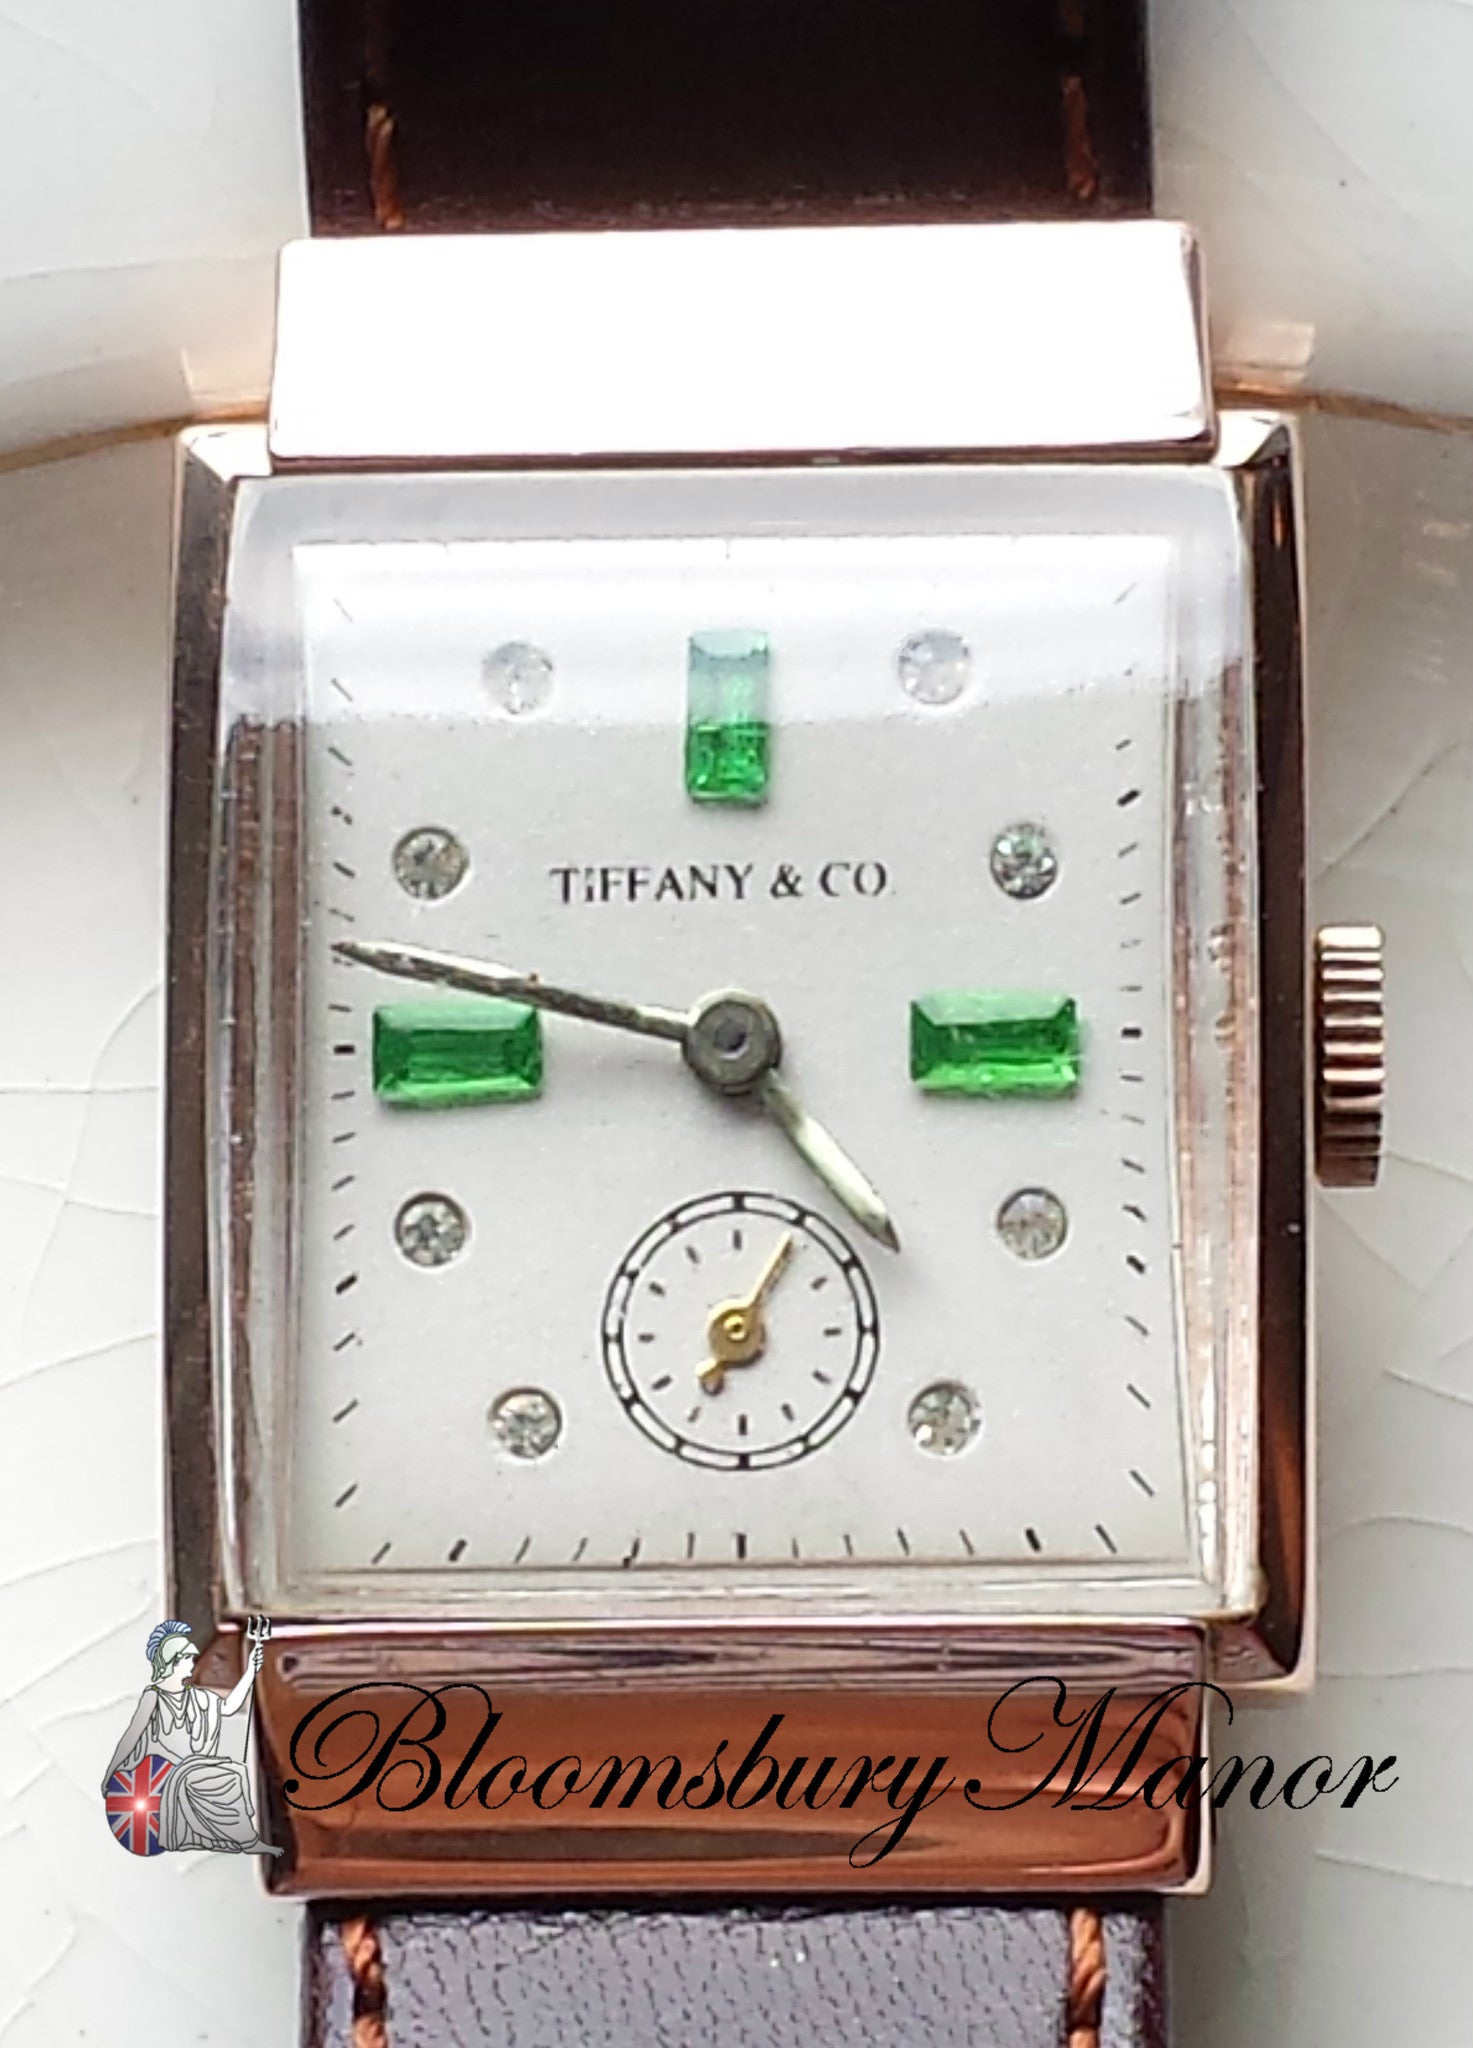 Tiffany & Co. 1940s Vintage Solid 14K Rose Gold Watch 17 Jewel, Swiss Movement